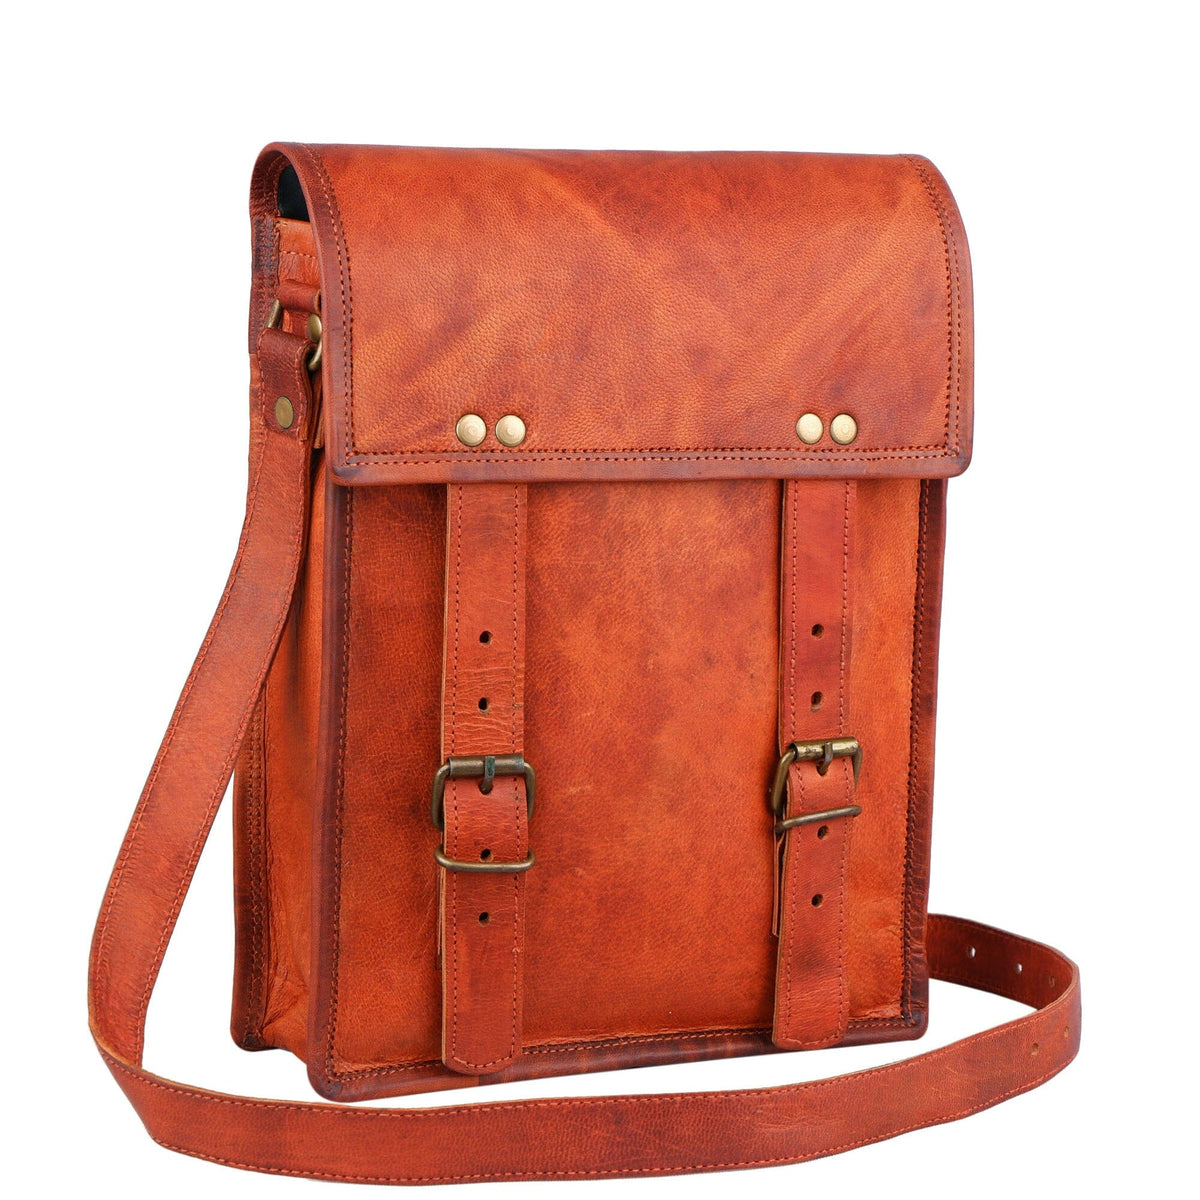 Shepard Leather Crossbody Bag | Women's Leather Crossover Purse ...